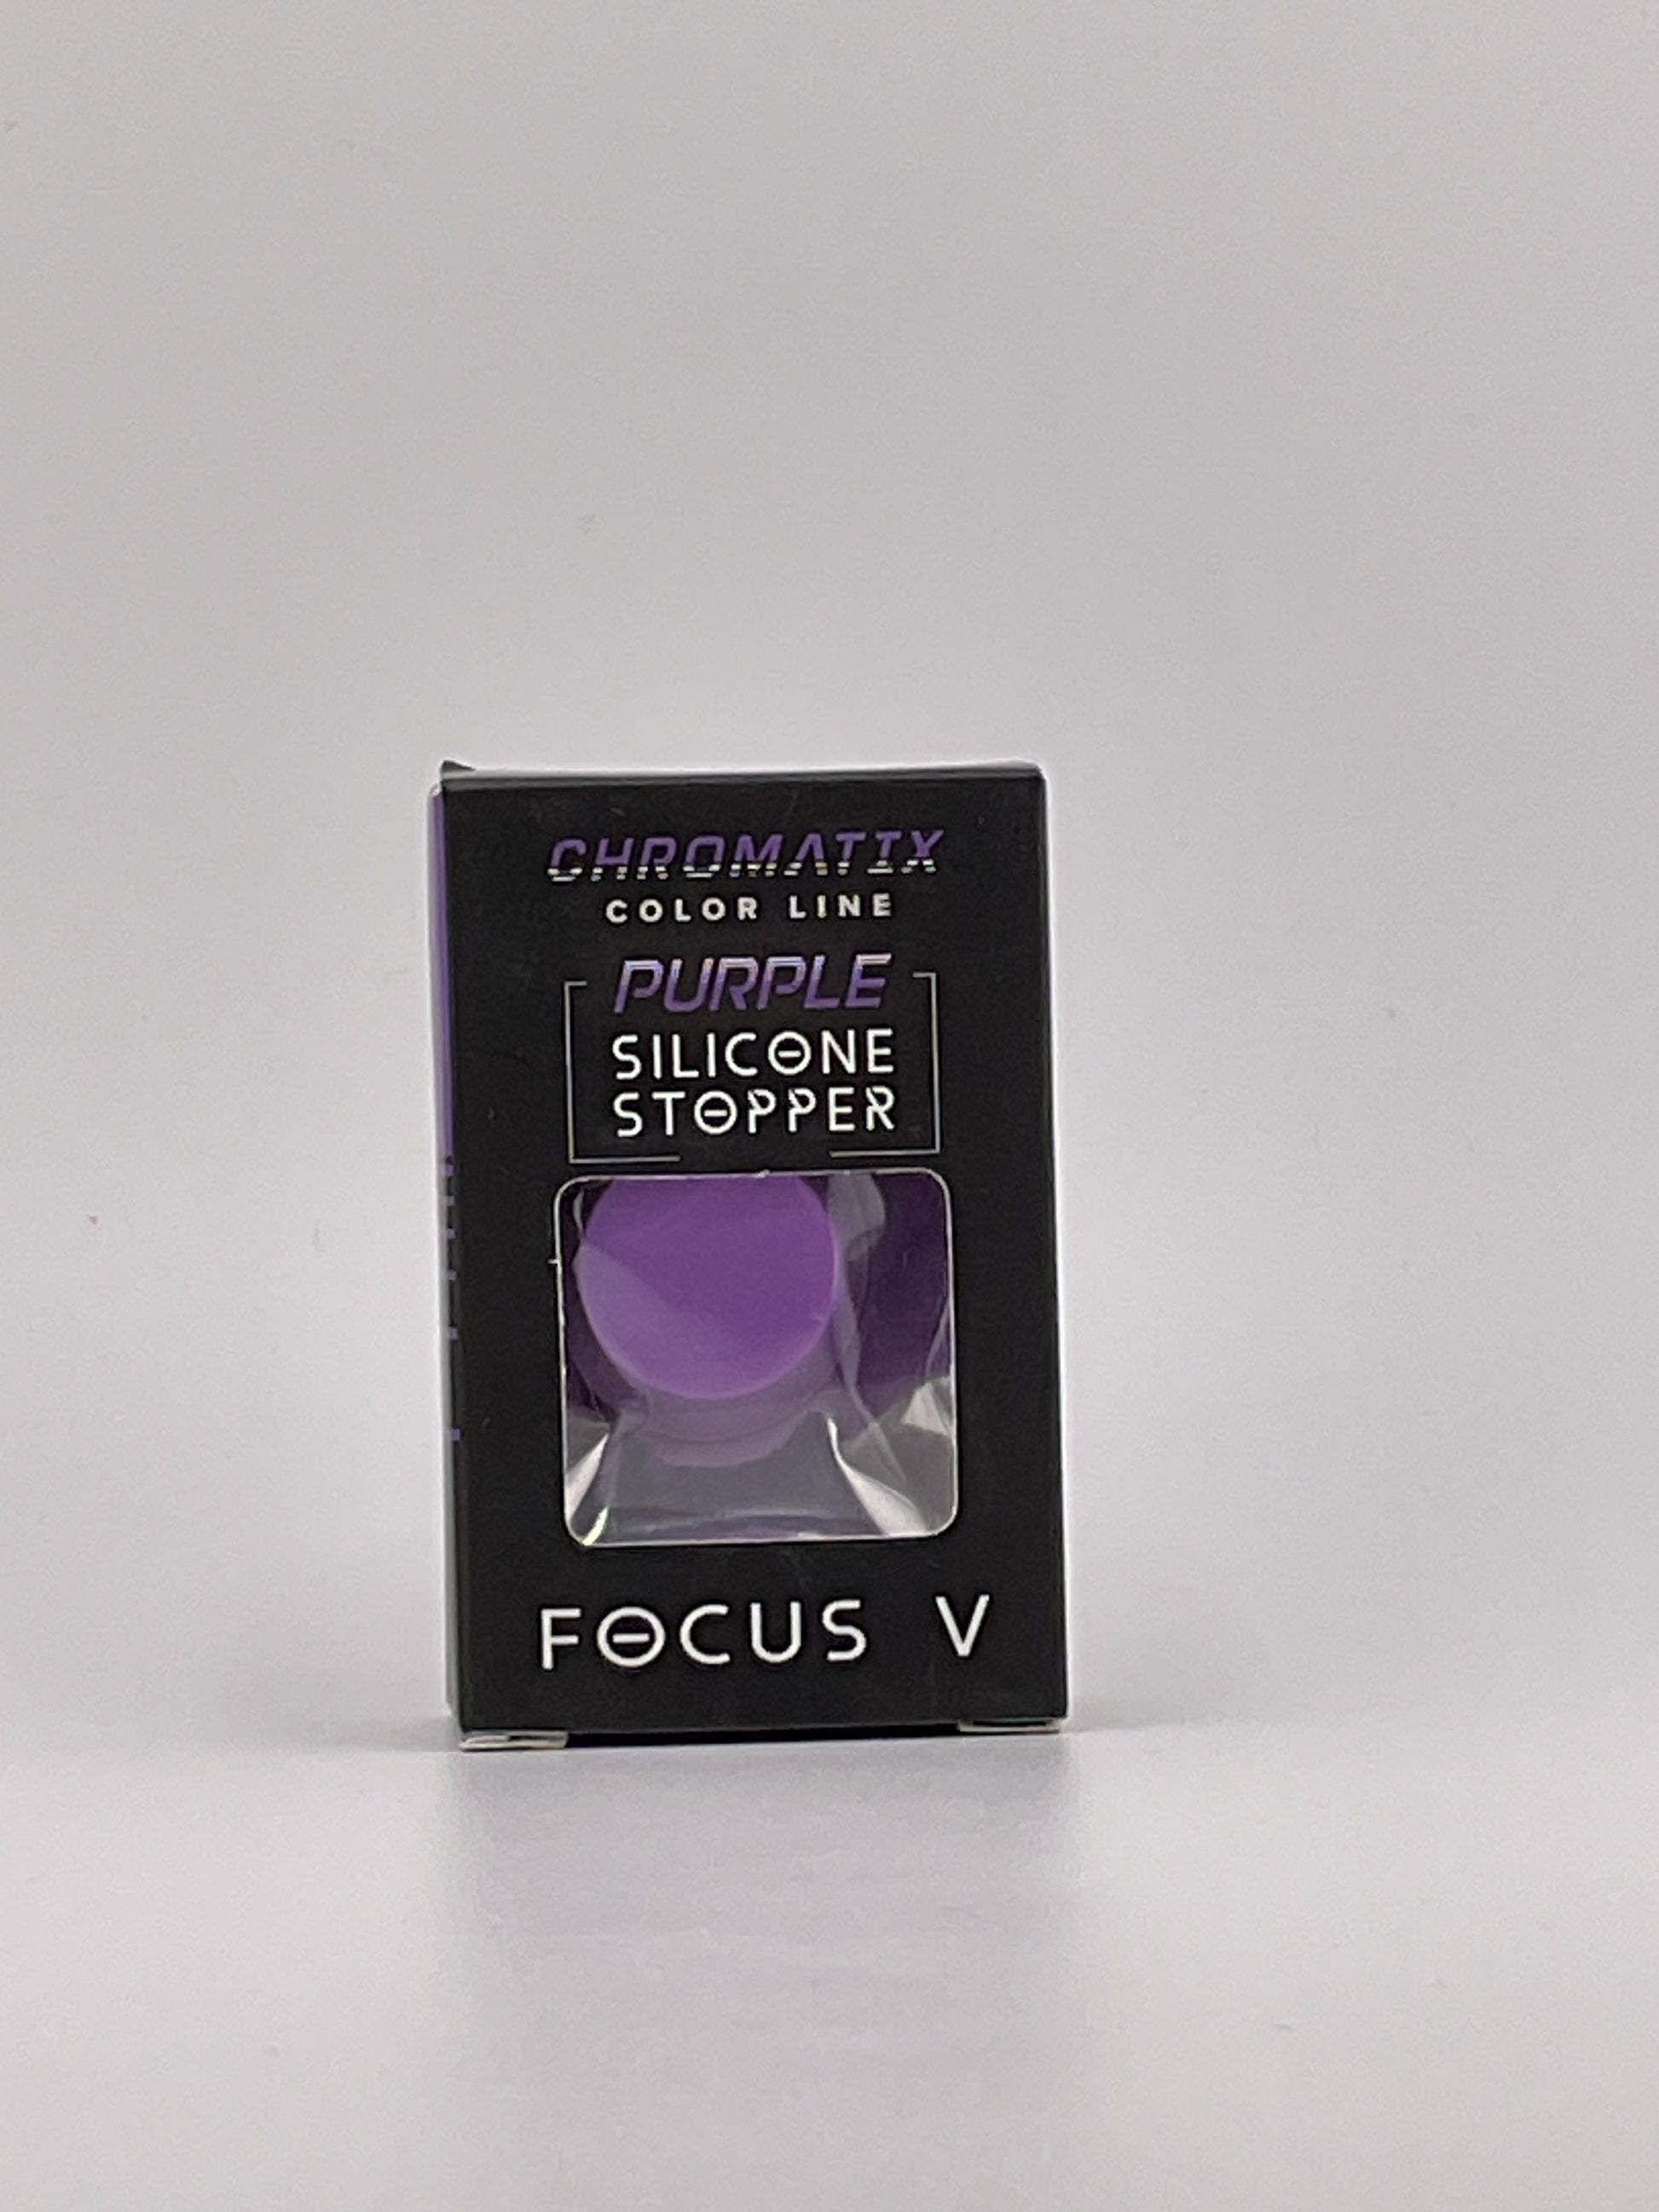 Carta focus V purple silicon stopper

Available for pickup in post falls Idaho